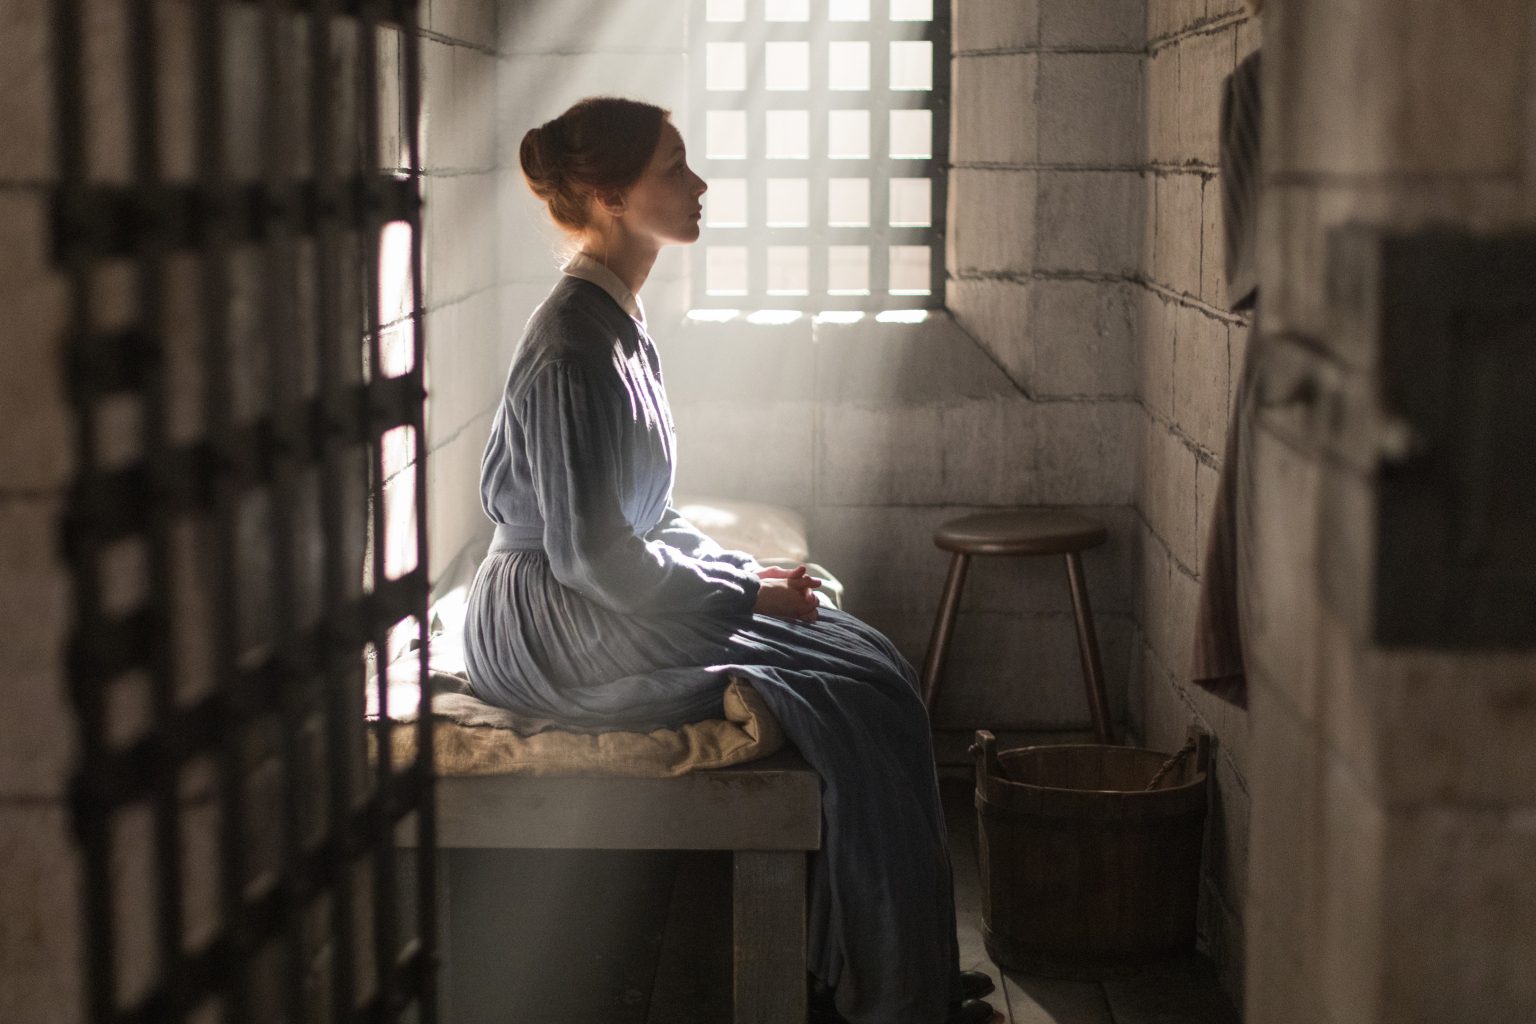 A woman sits in a prison cell